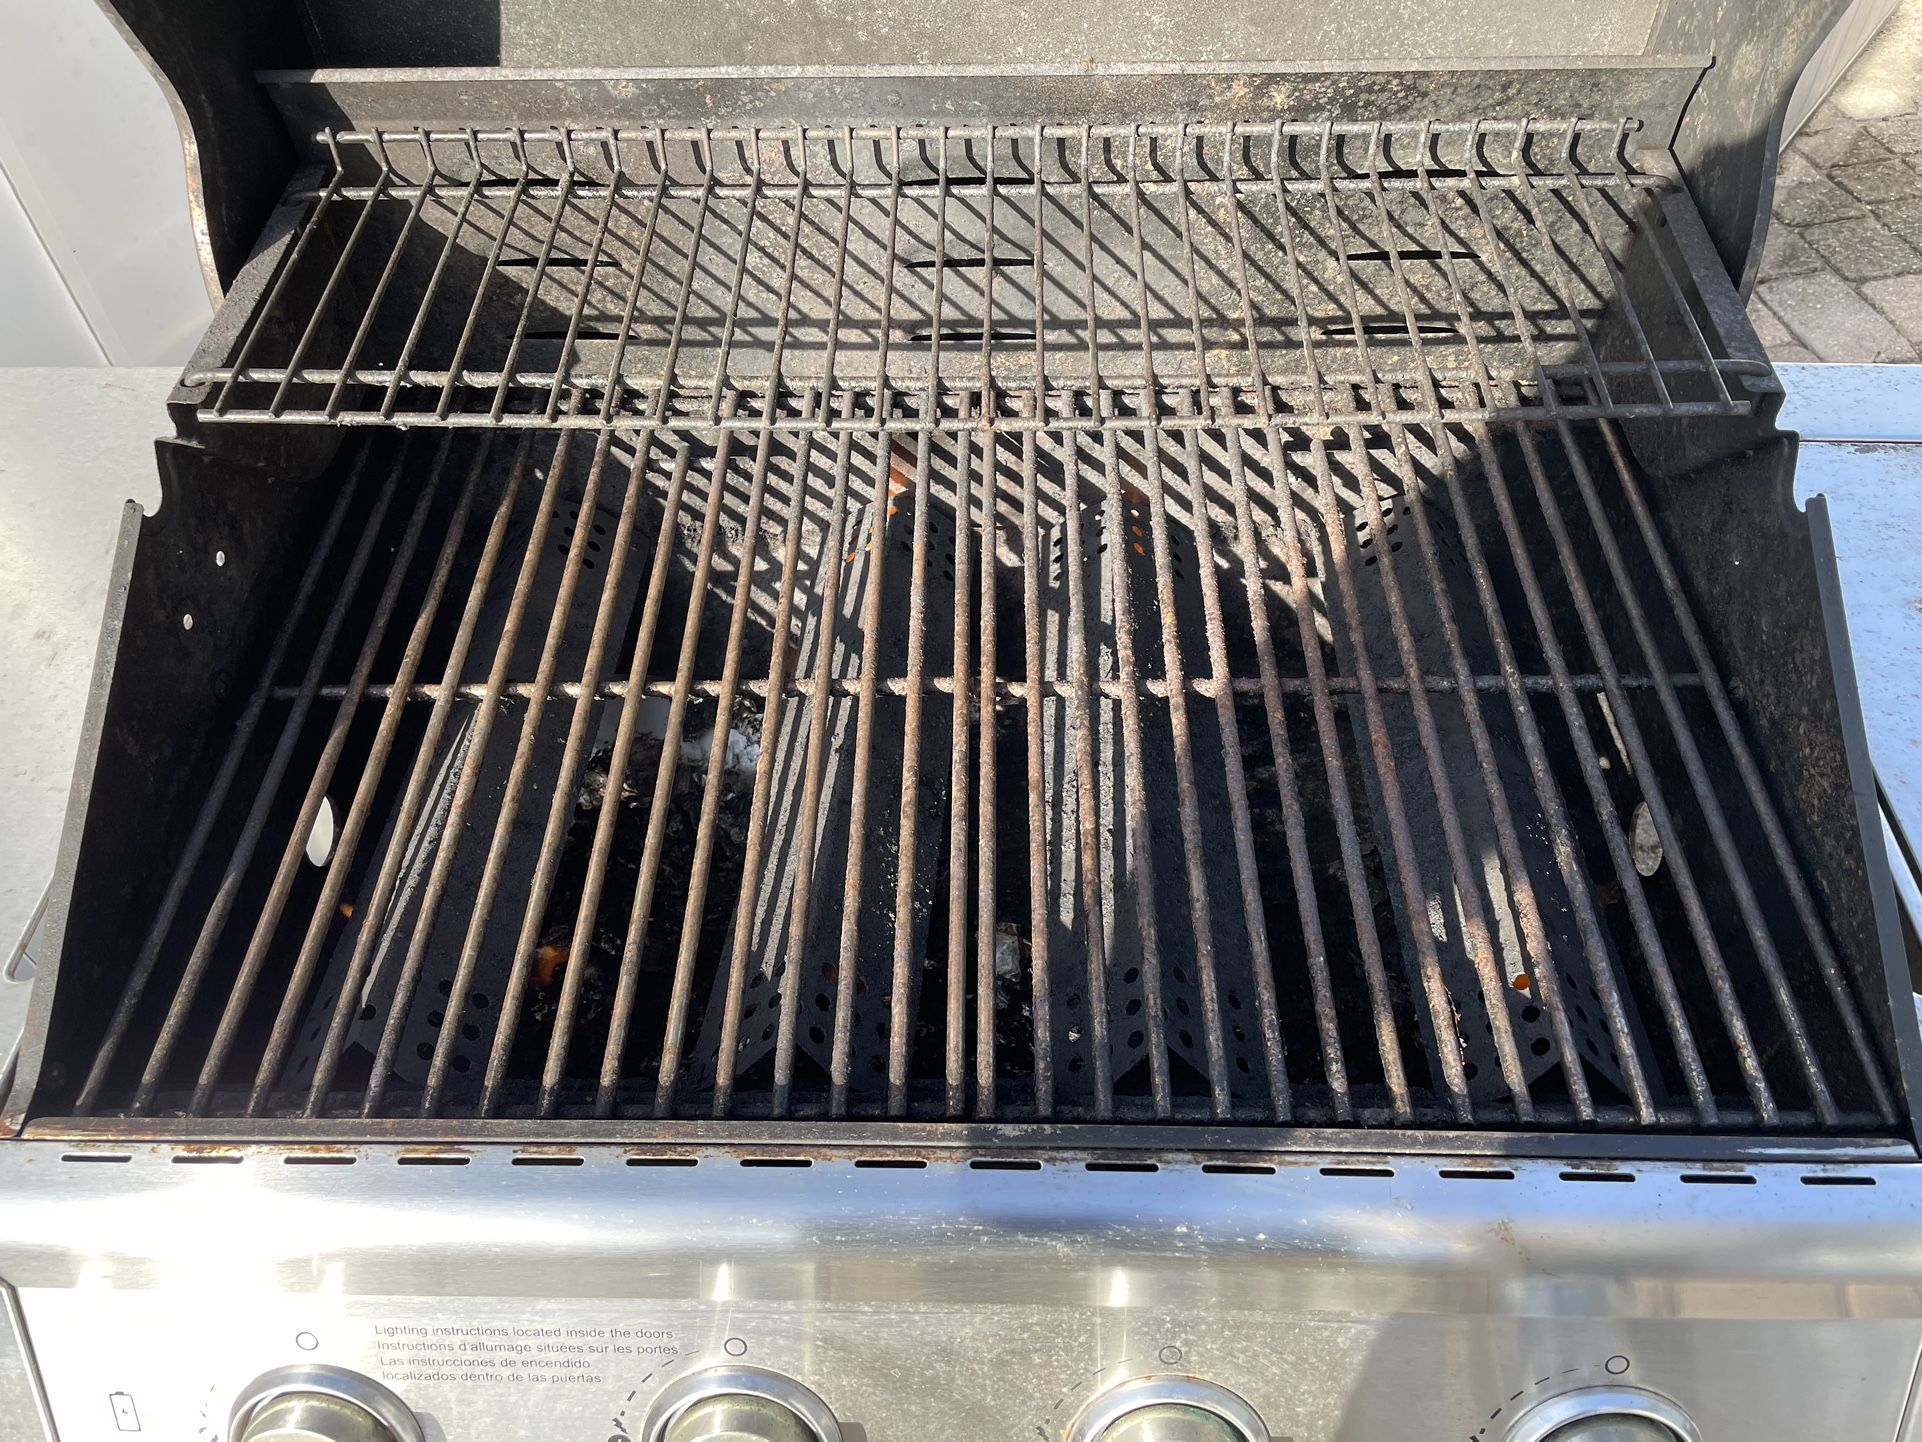 grill 4 Burner Gas Grill Sale in Fort Lauderdale, FL - OfferUp